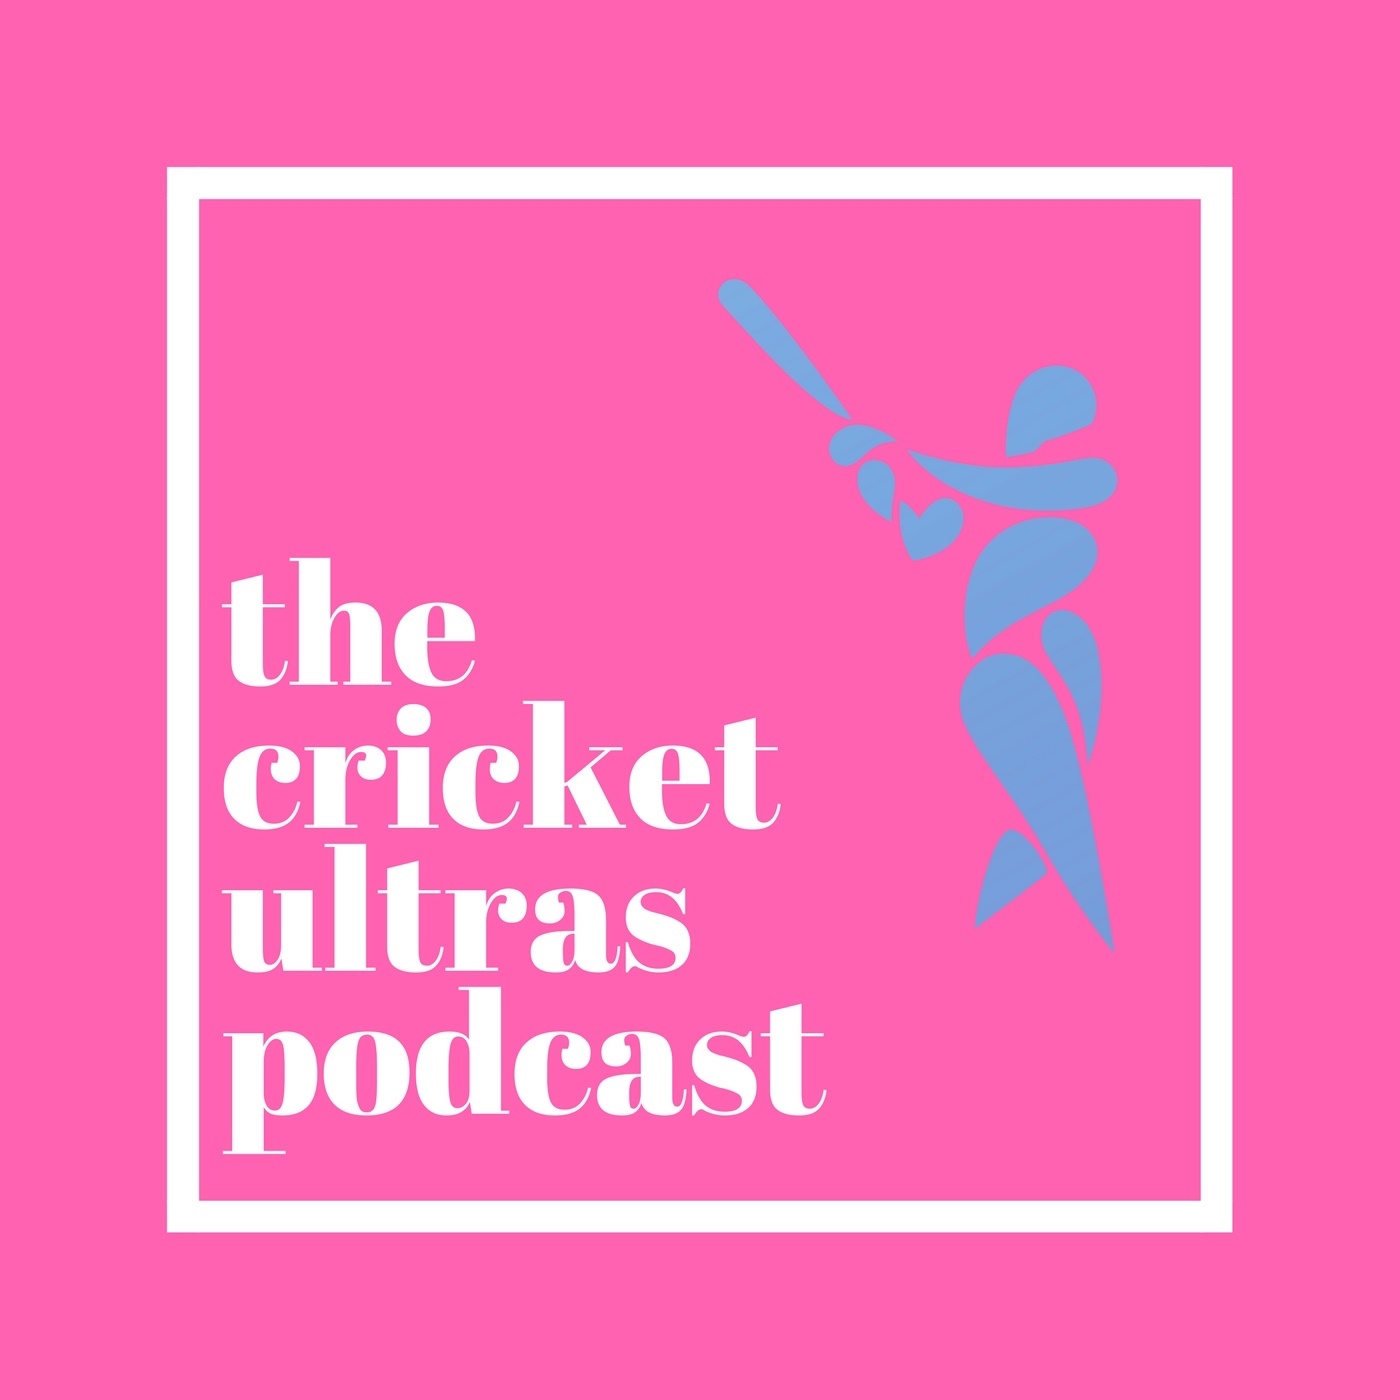 Ep 5: SA outclass India, ODI review, IPL auction preview, spoiler alerts & more